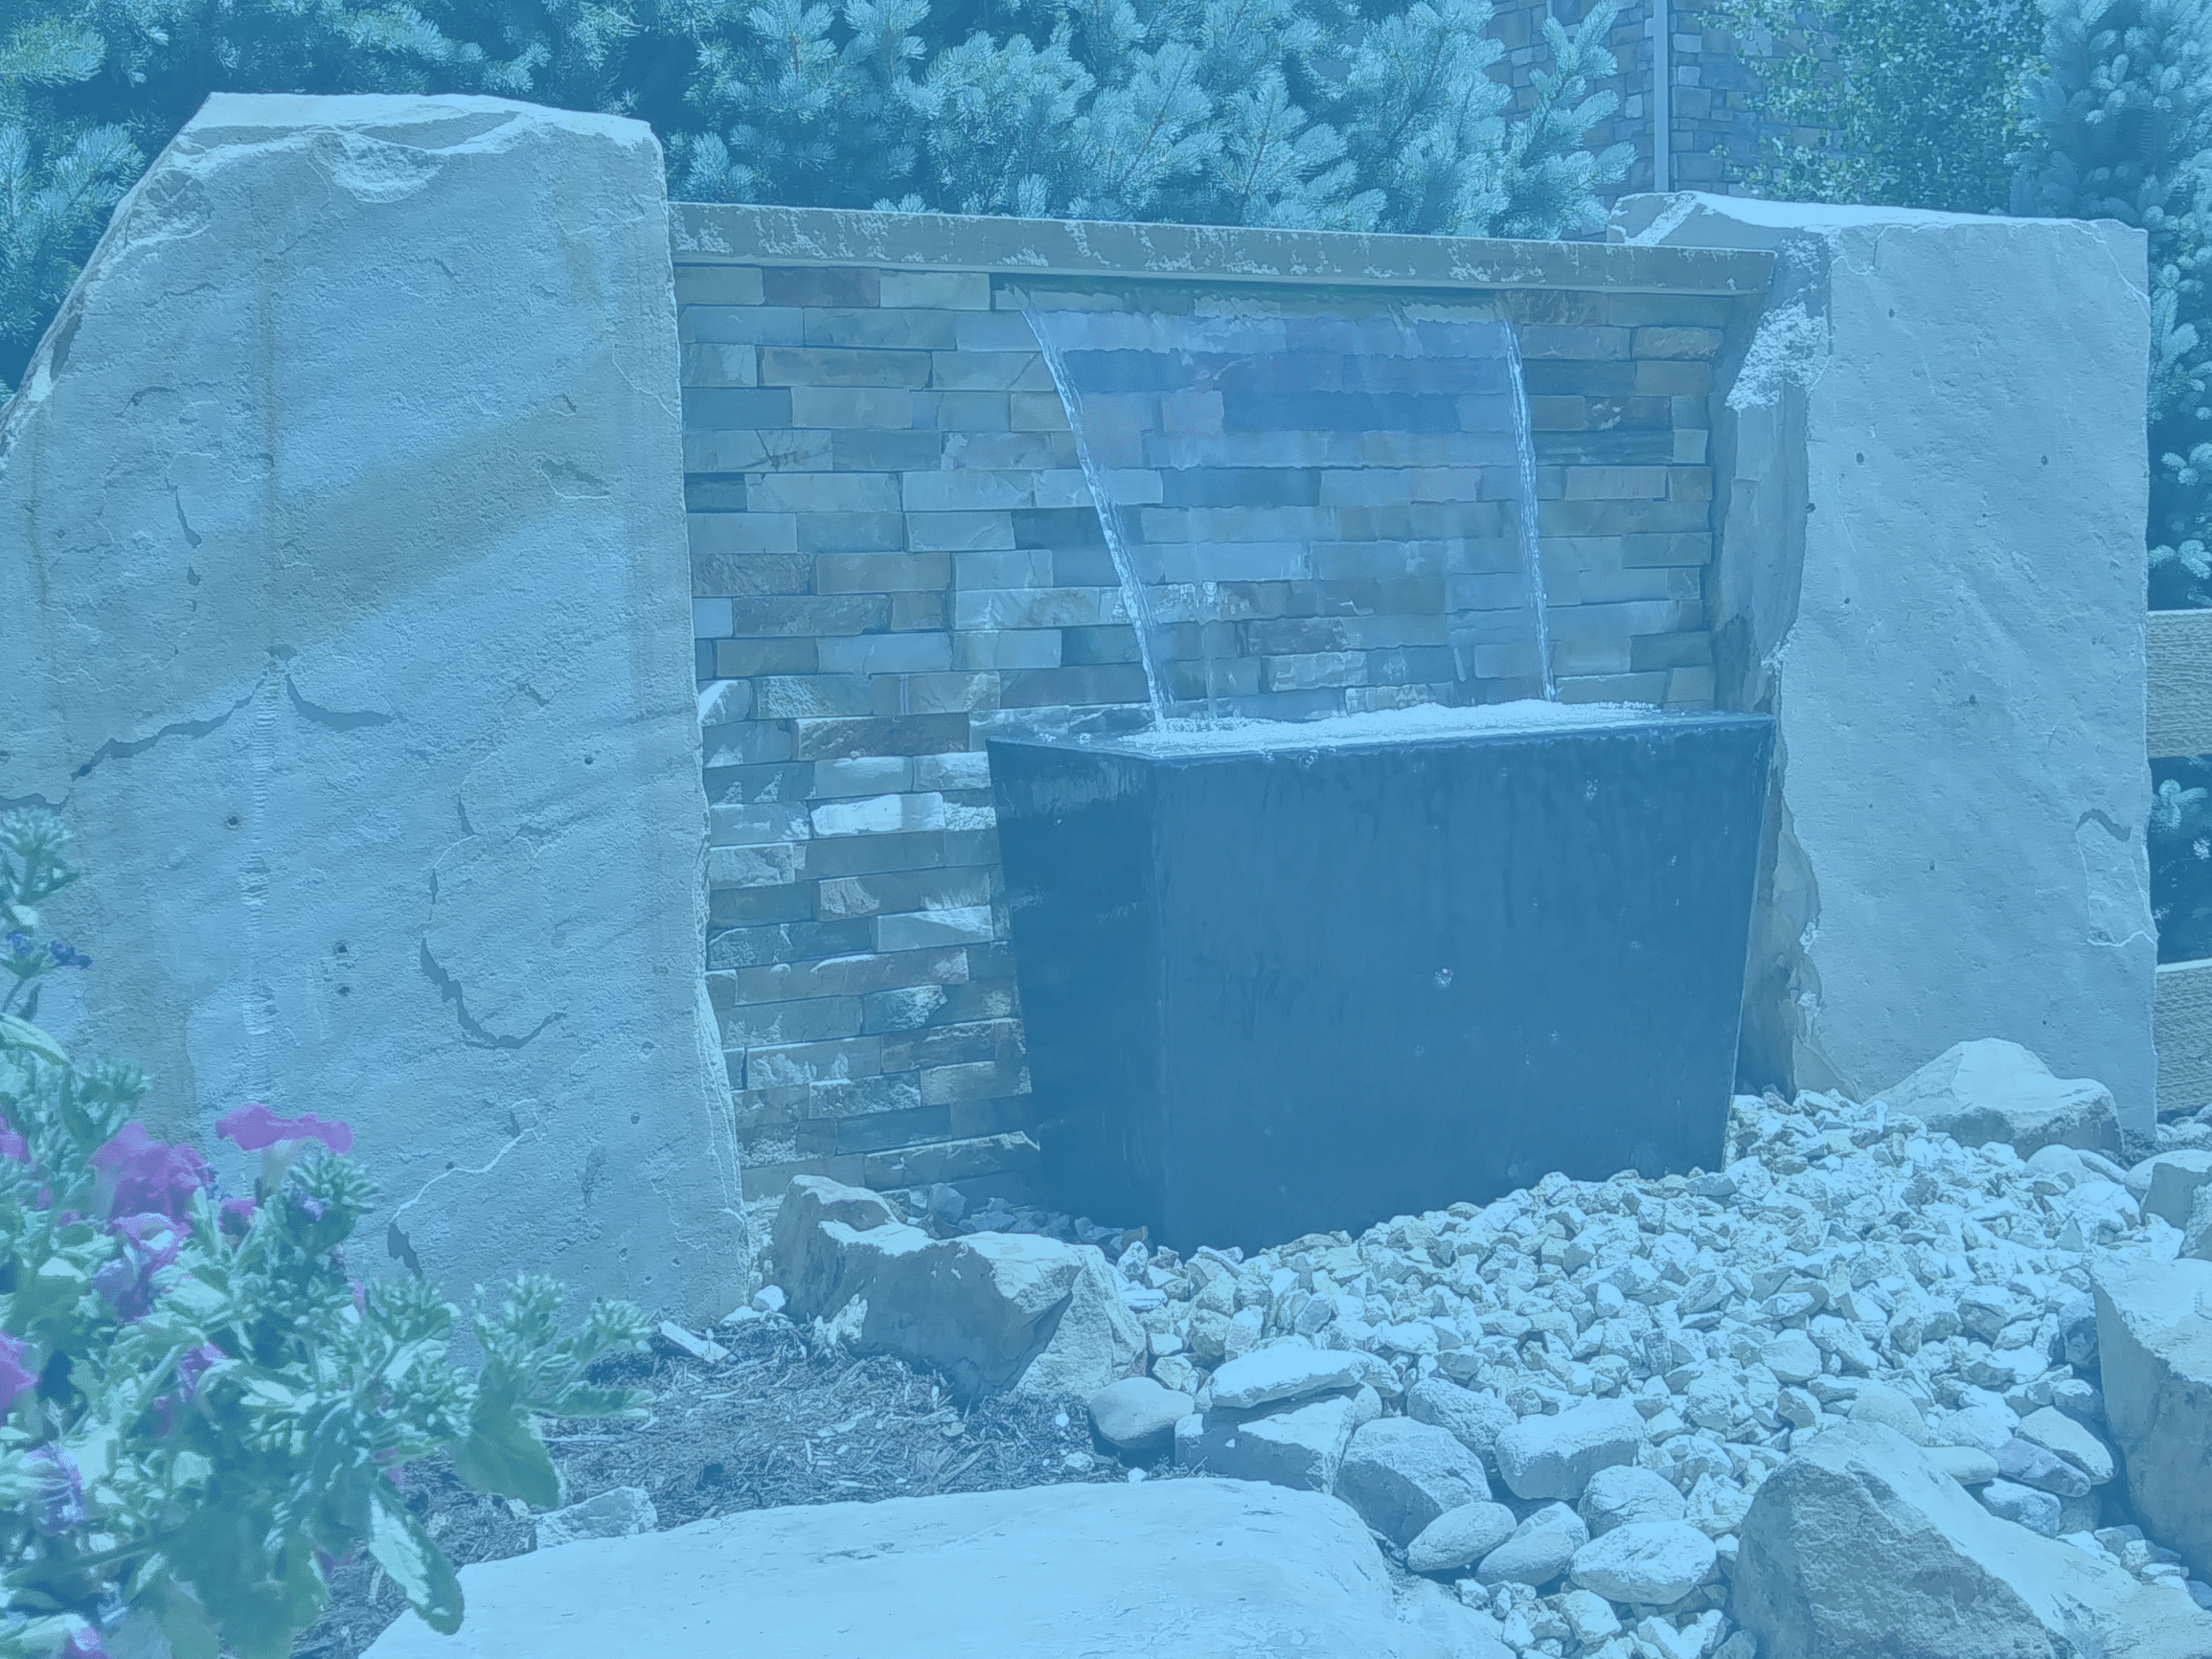 Small water feature surrounded by large decorative rocks, landscape rocks, and mulch with plants and bushes.